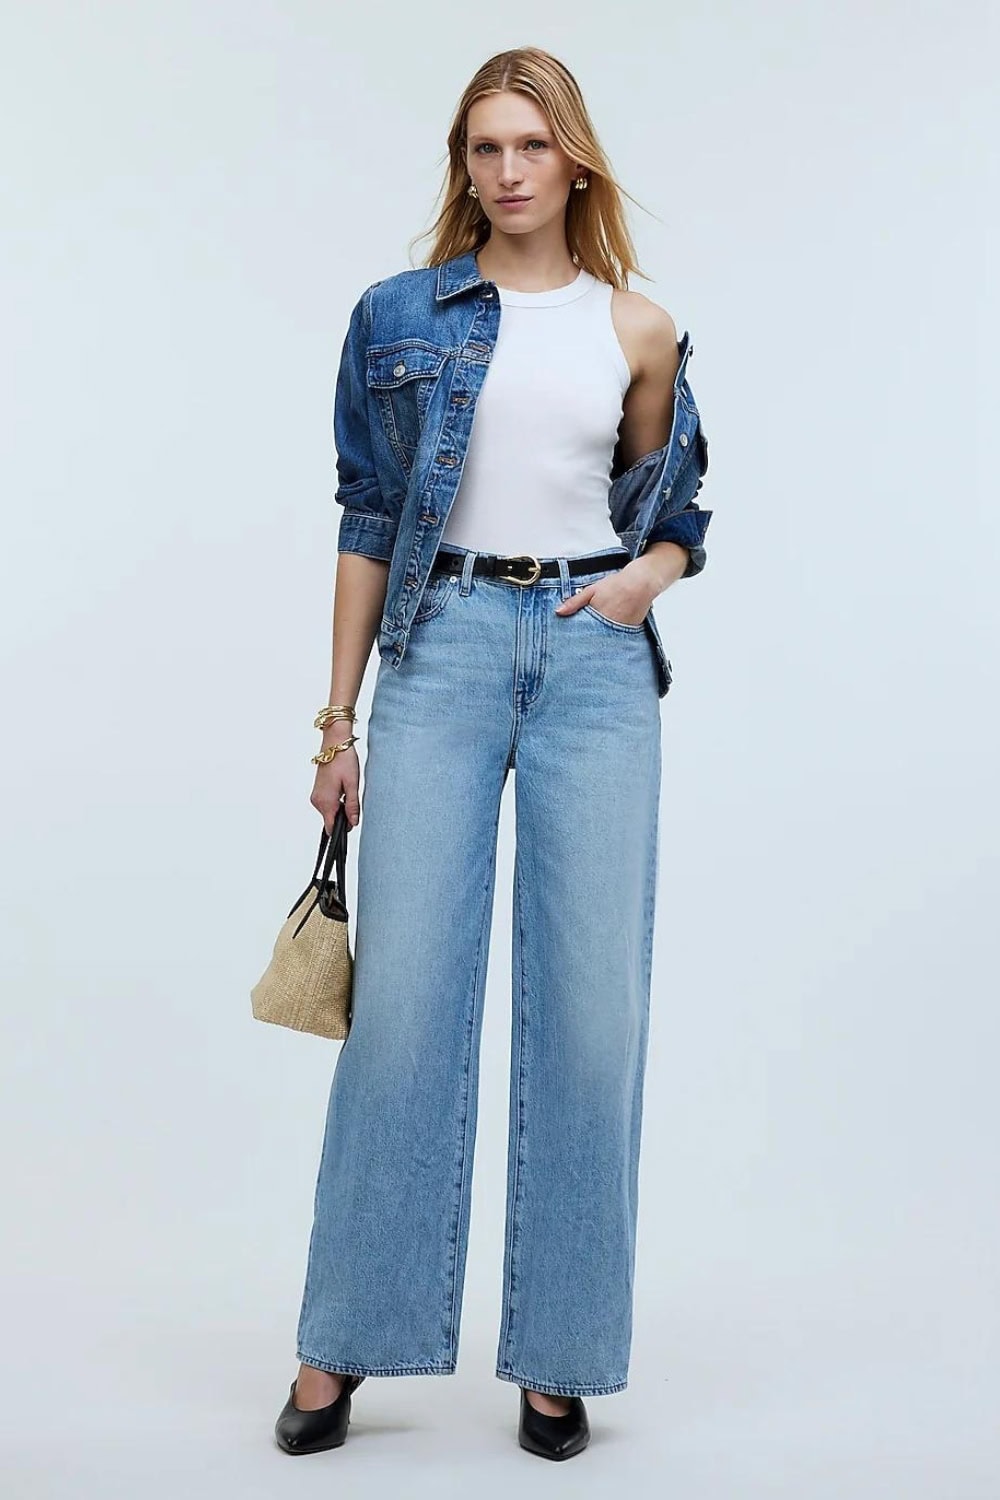 Best Wide Leg Jeans for Work - Madewell